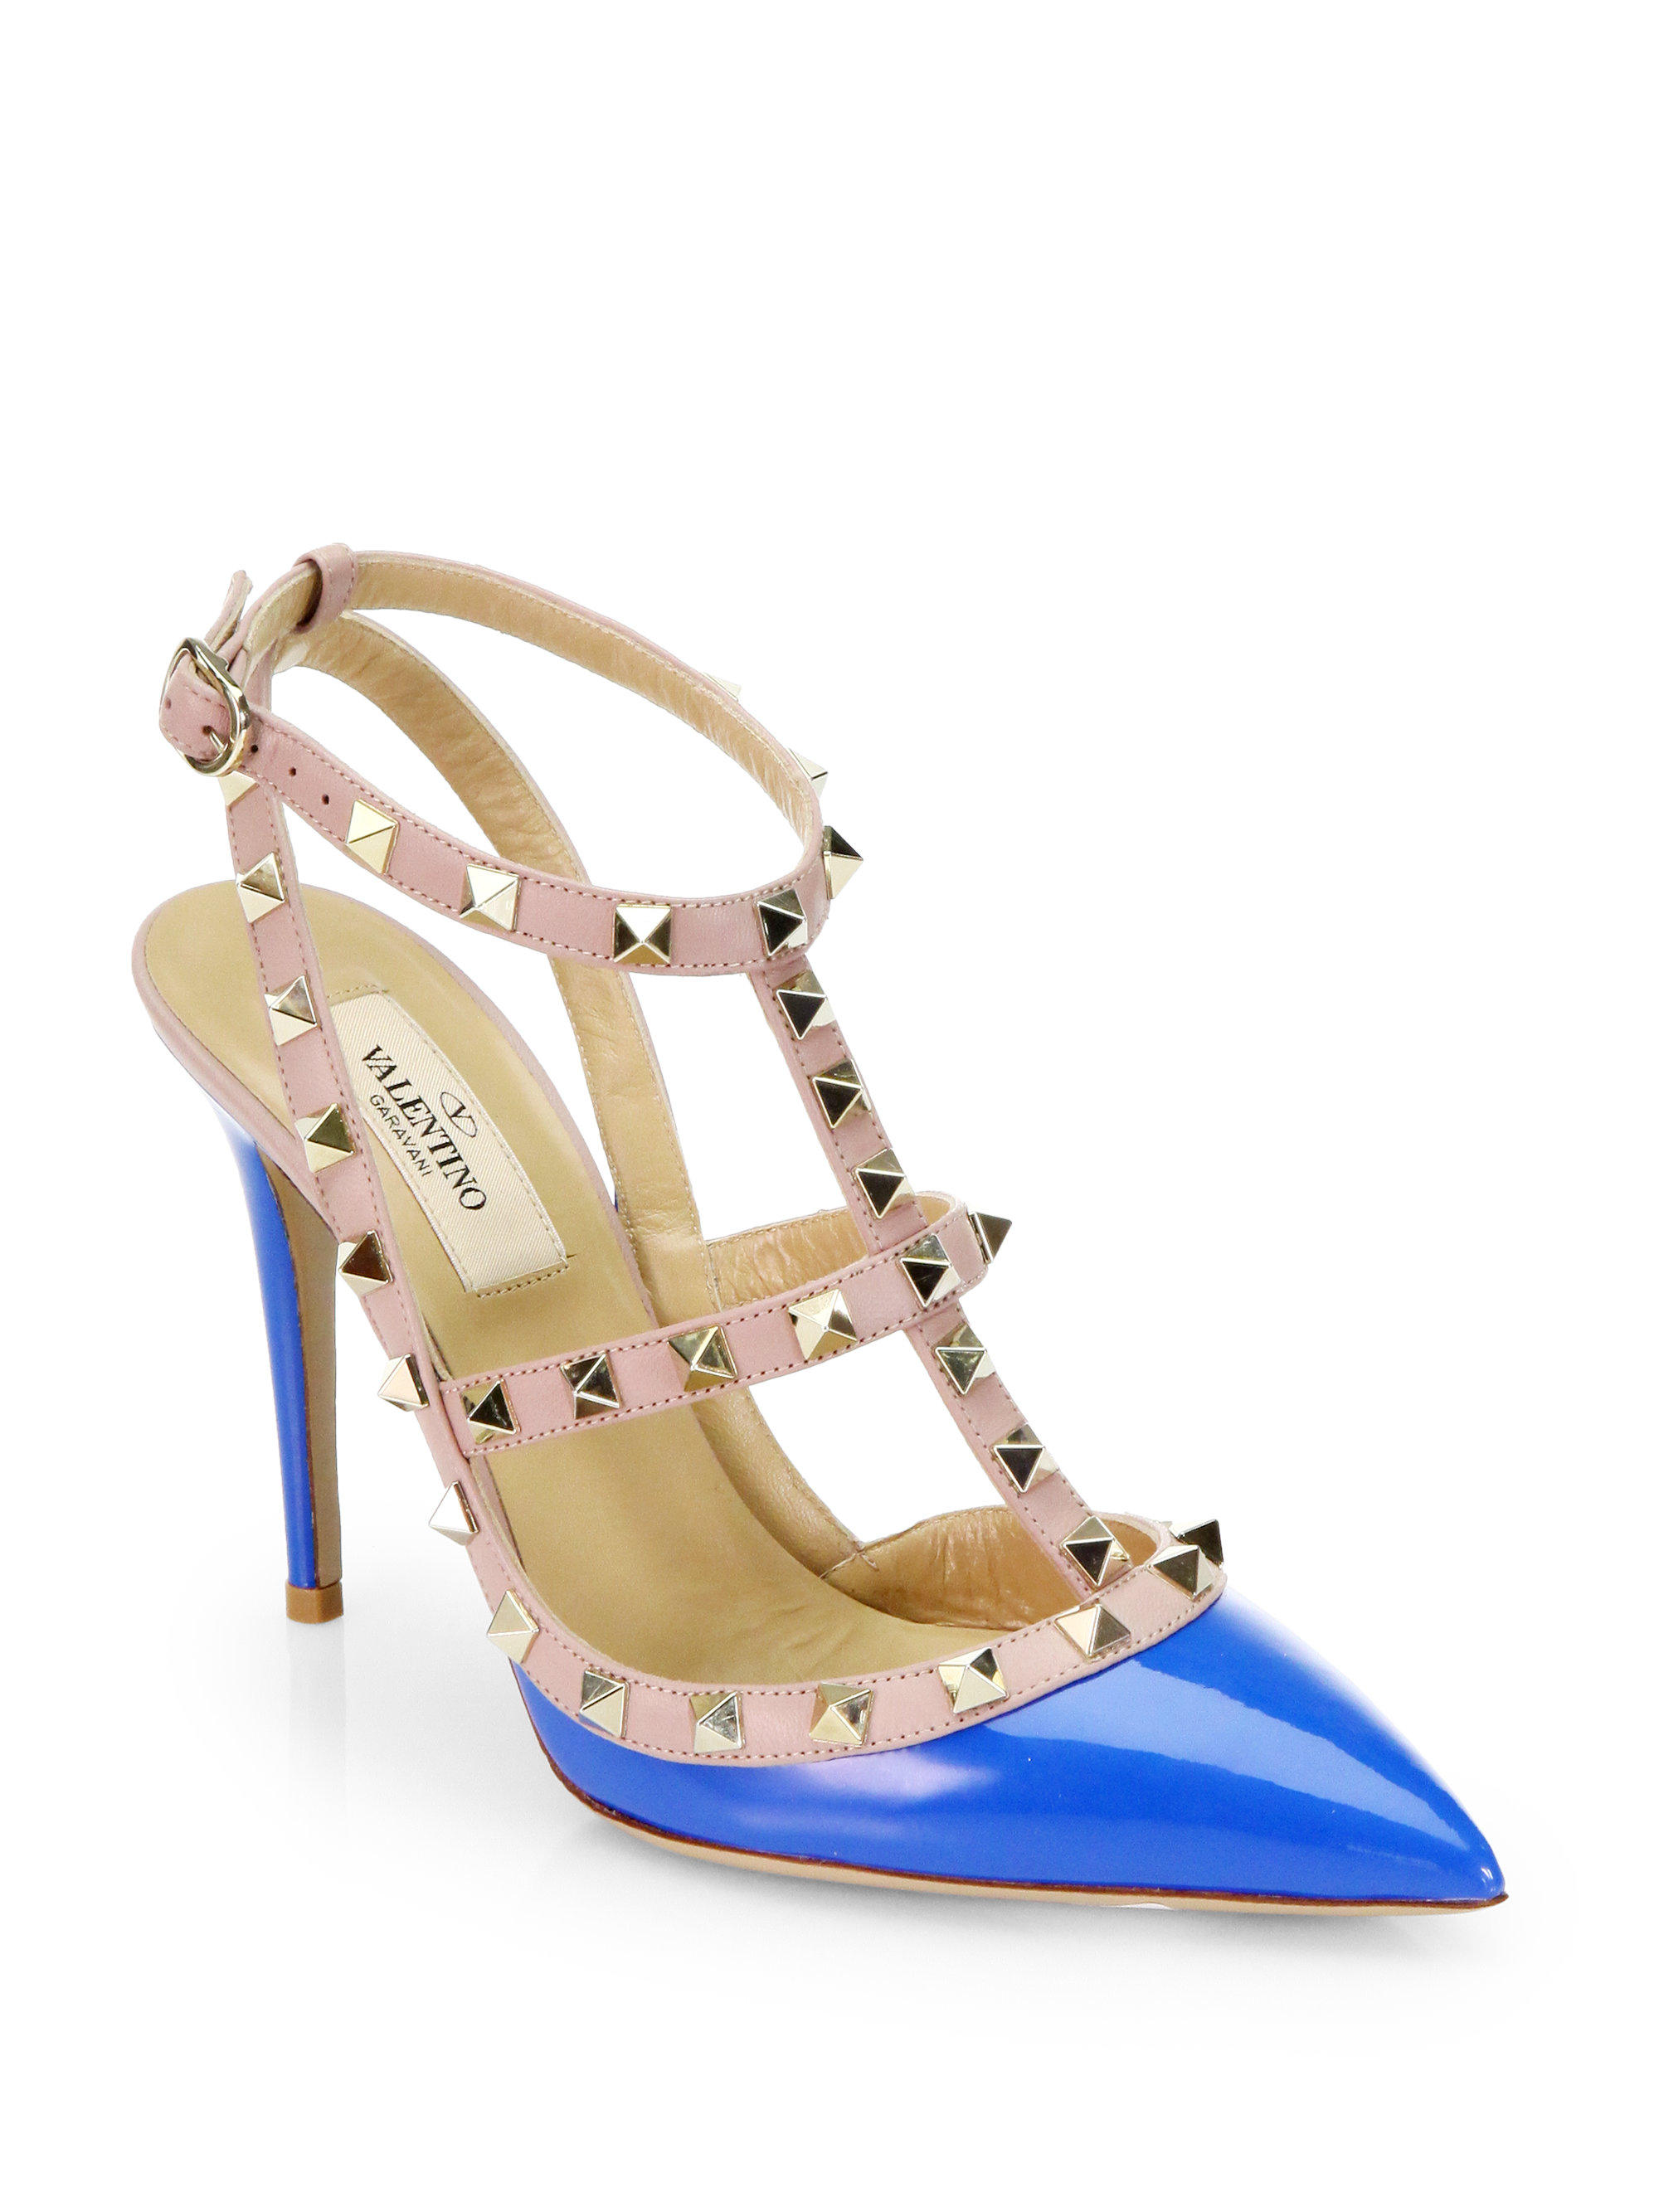 Valentino Rockstud Patent Leather Slingback Pumps in Blue (YELLOW) | Lyst